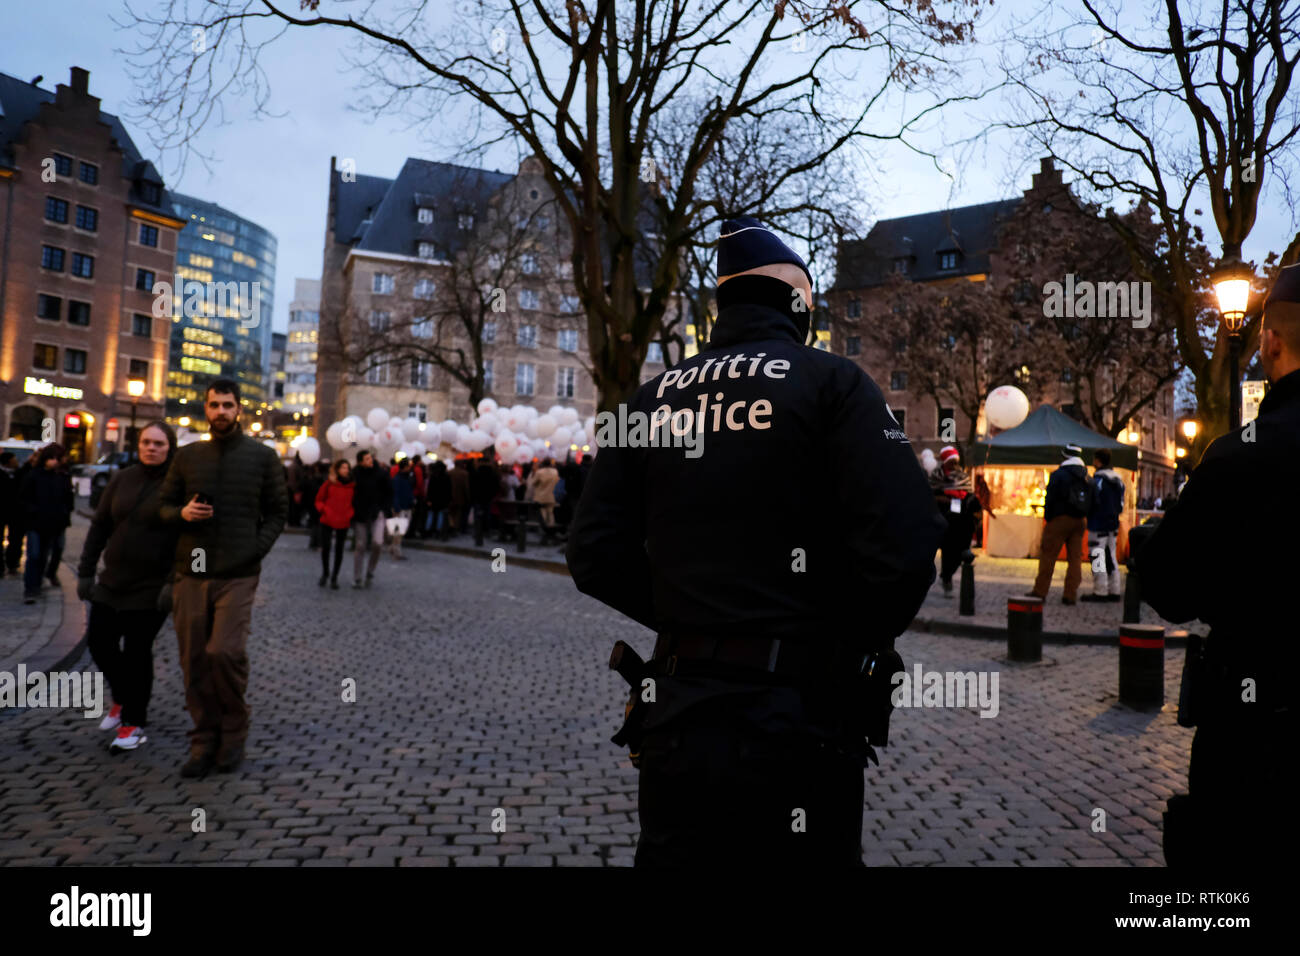 Brussels, Belgium. 1st Mar, 2019. Activists protesting against executions. Credit: ALEXANDROS MICHAILIDIS/Alamy Live News Stock Photo